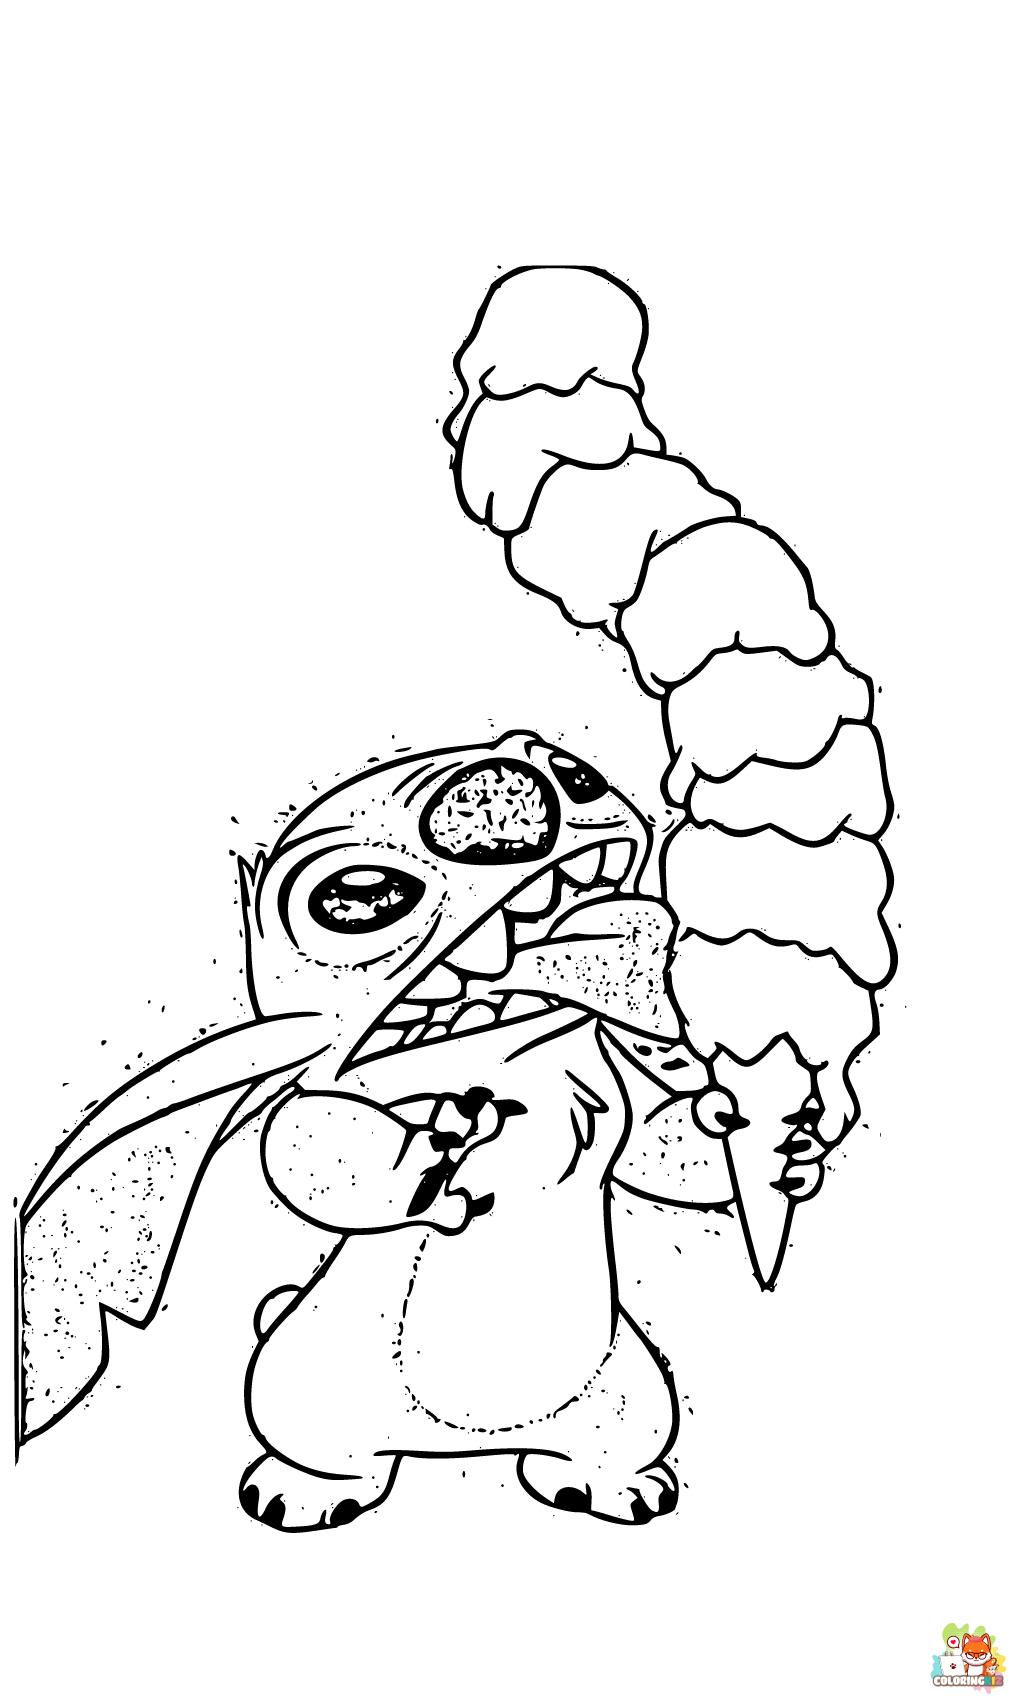 Stitch Coloring Pages free